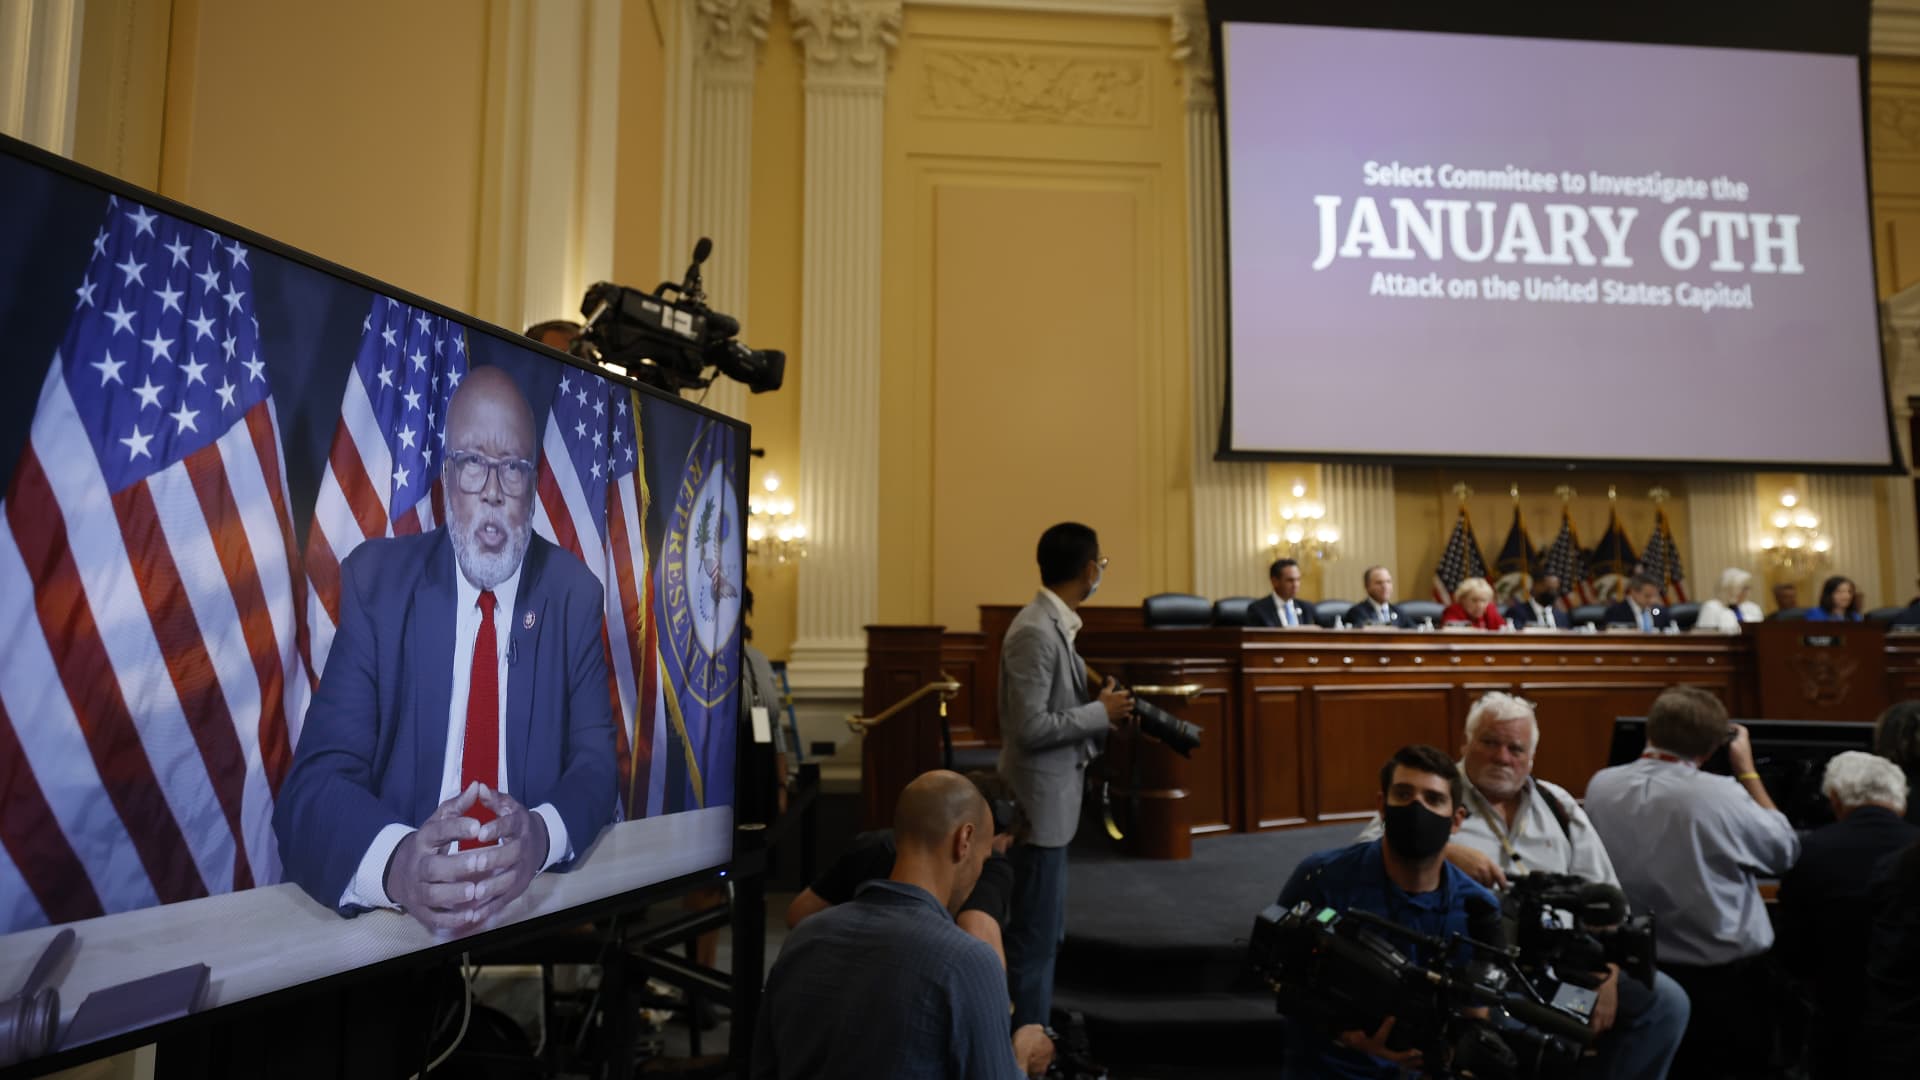 Rep. Bennie Thompson, chairman of the House Select Committee to Investigate the January 6th Attack on the U.S. Capitol, delivers opening remarks via video due to being positive for COVID-19 in the Cannon House Office Building on July 21, 2022 in Washington, DC.